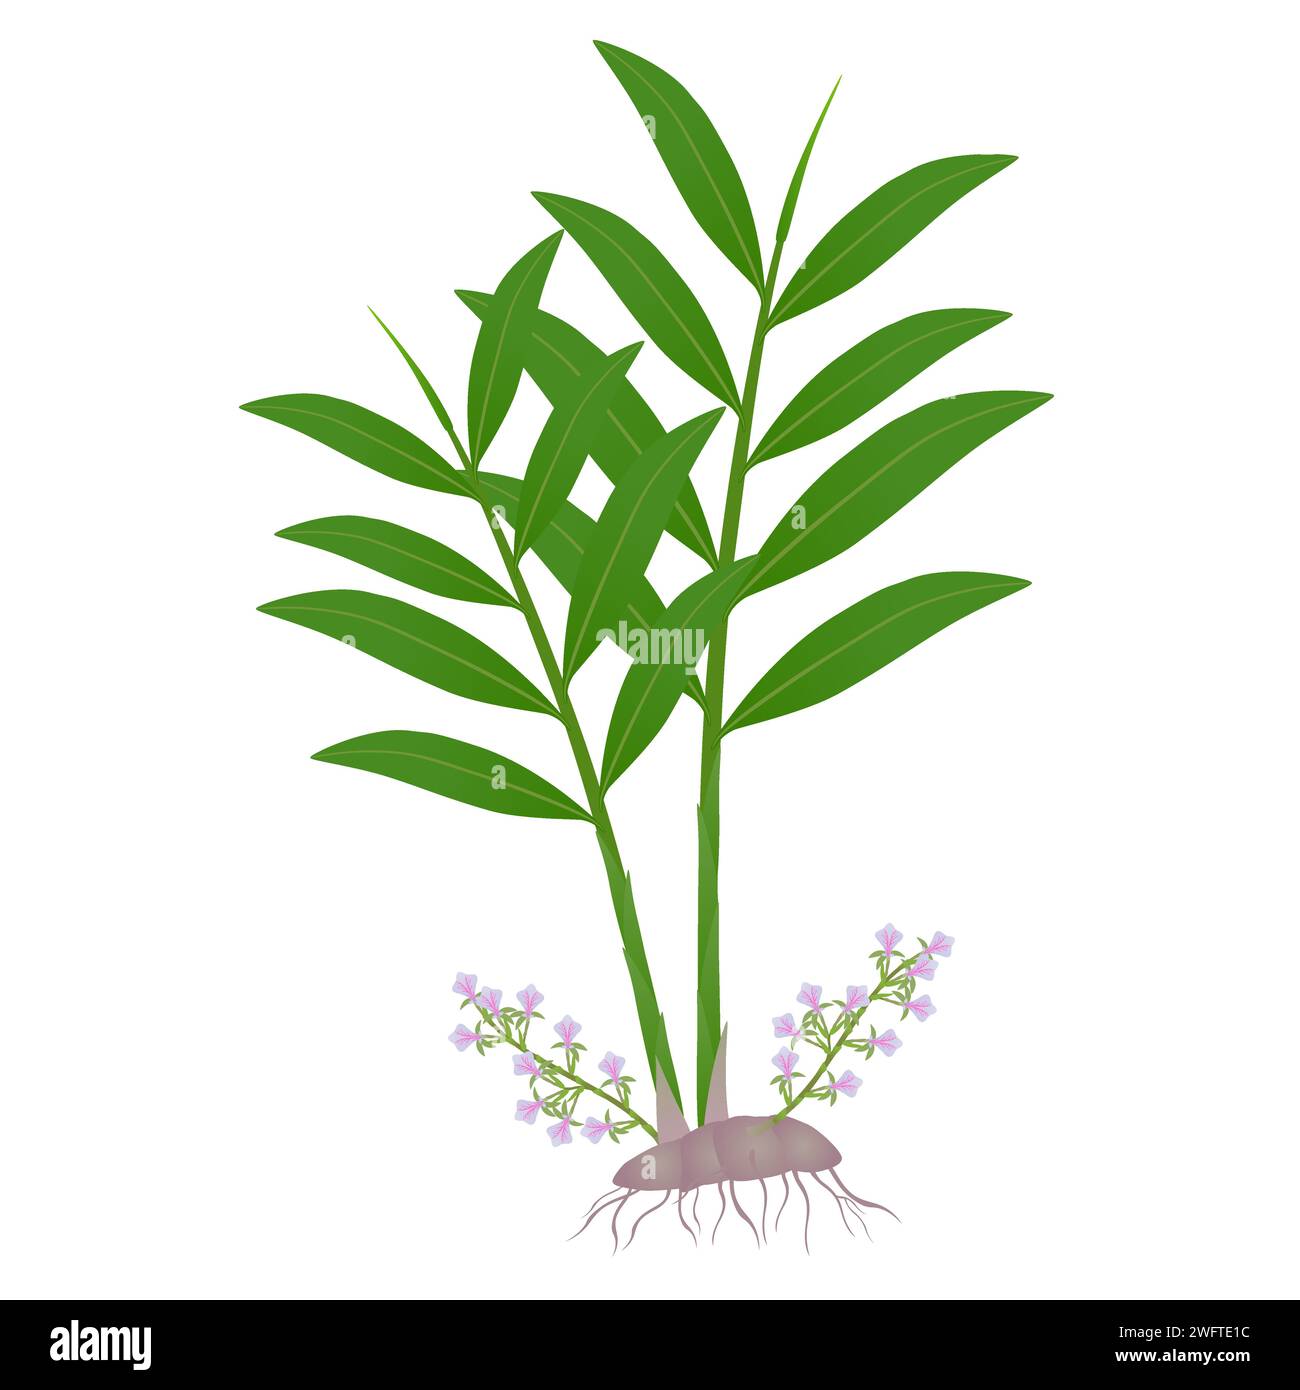 True cardamom elettaria cardamomum plant with flowers on a white background. Stock Vector